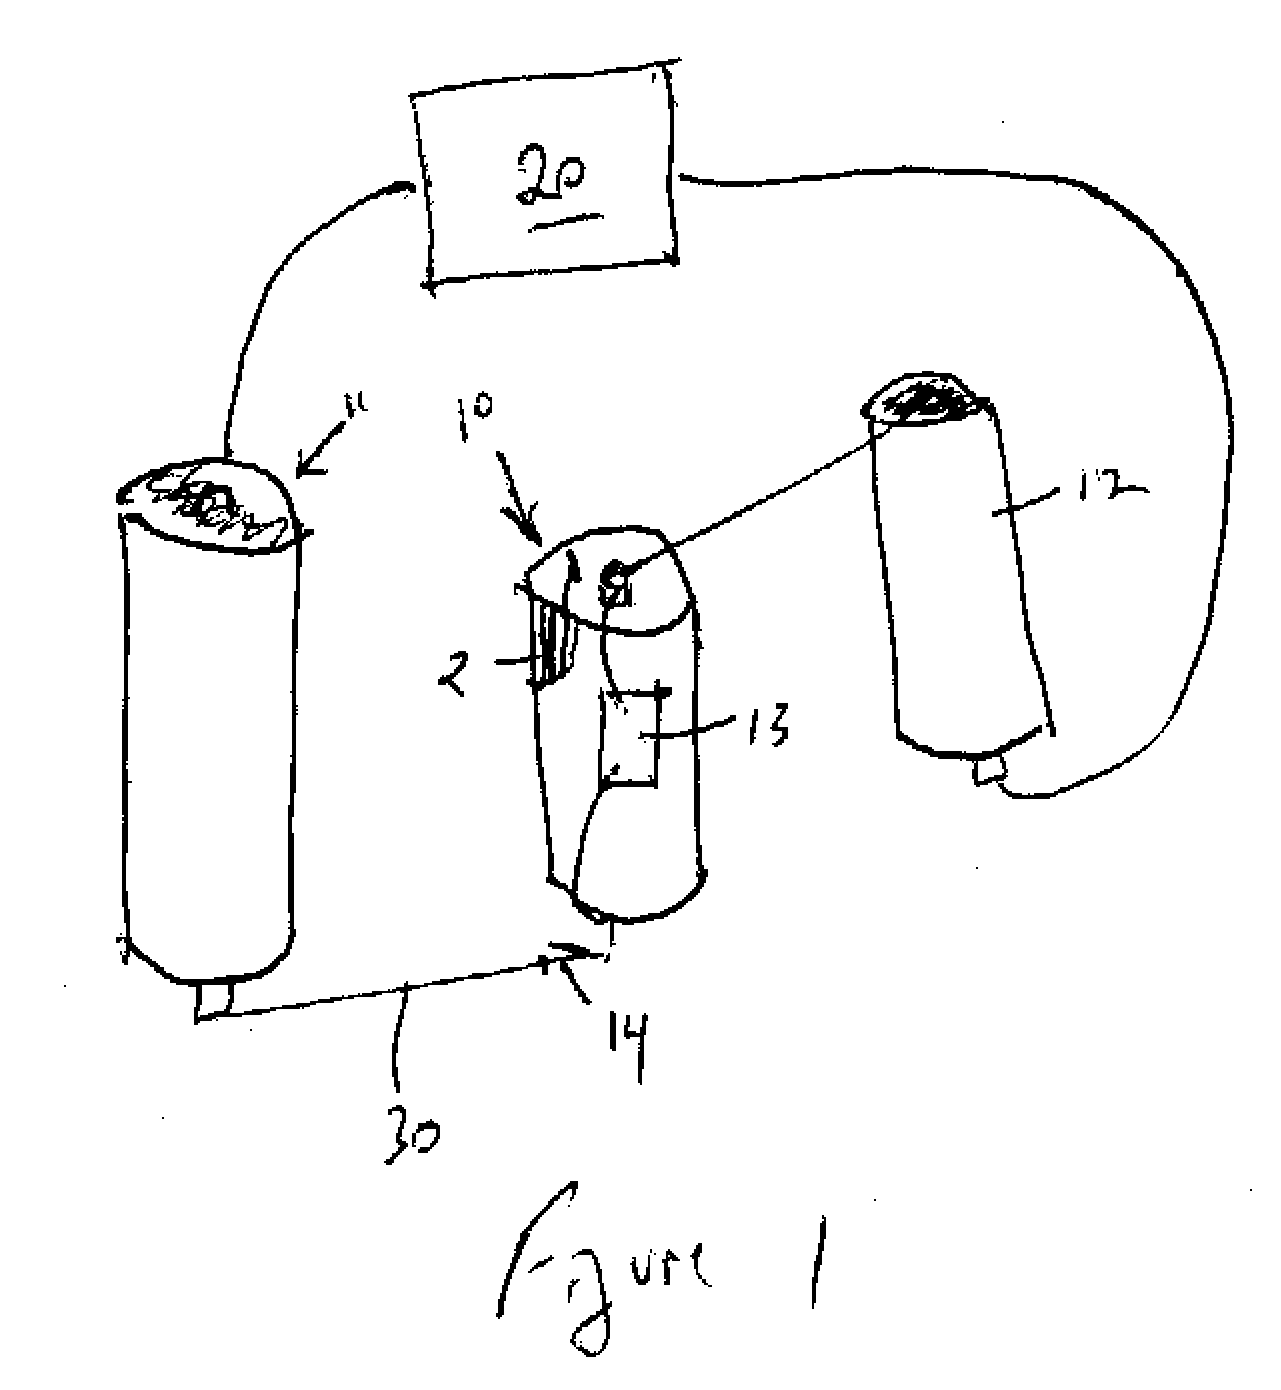 Primary high energy density balanced cell with safety circuit